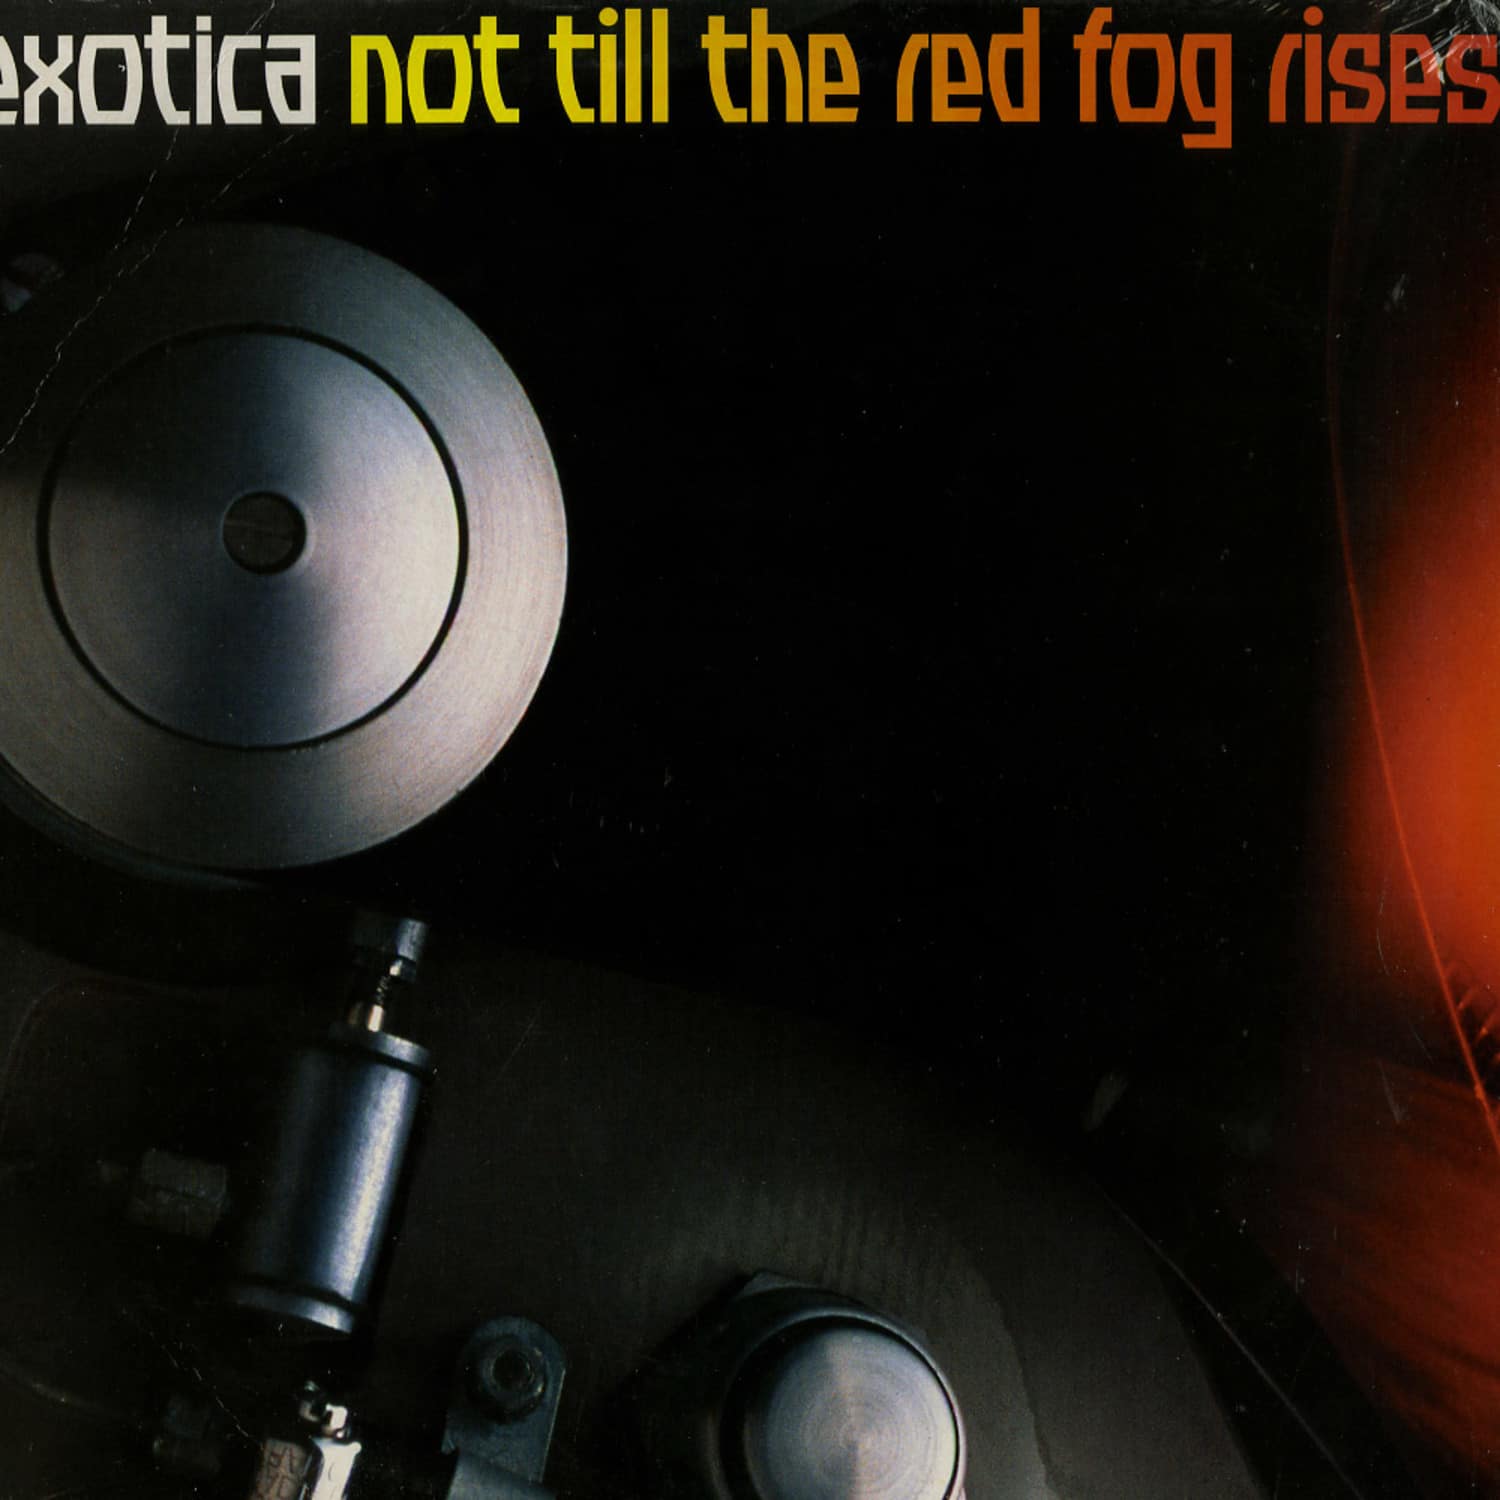 Exotica - NOT TILL THE RED FOG RISES